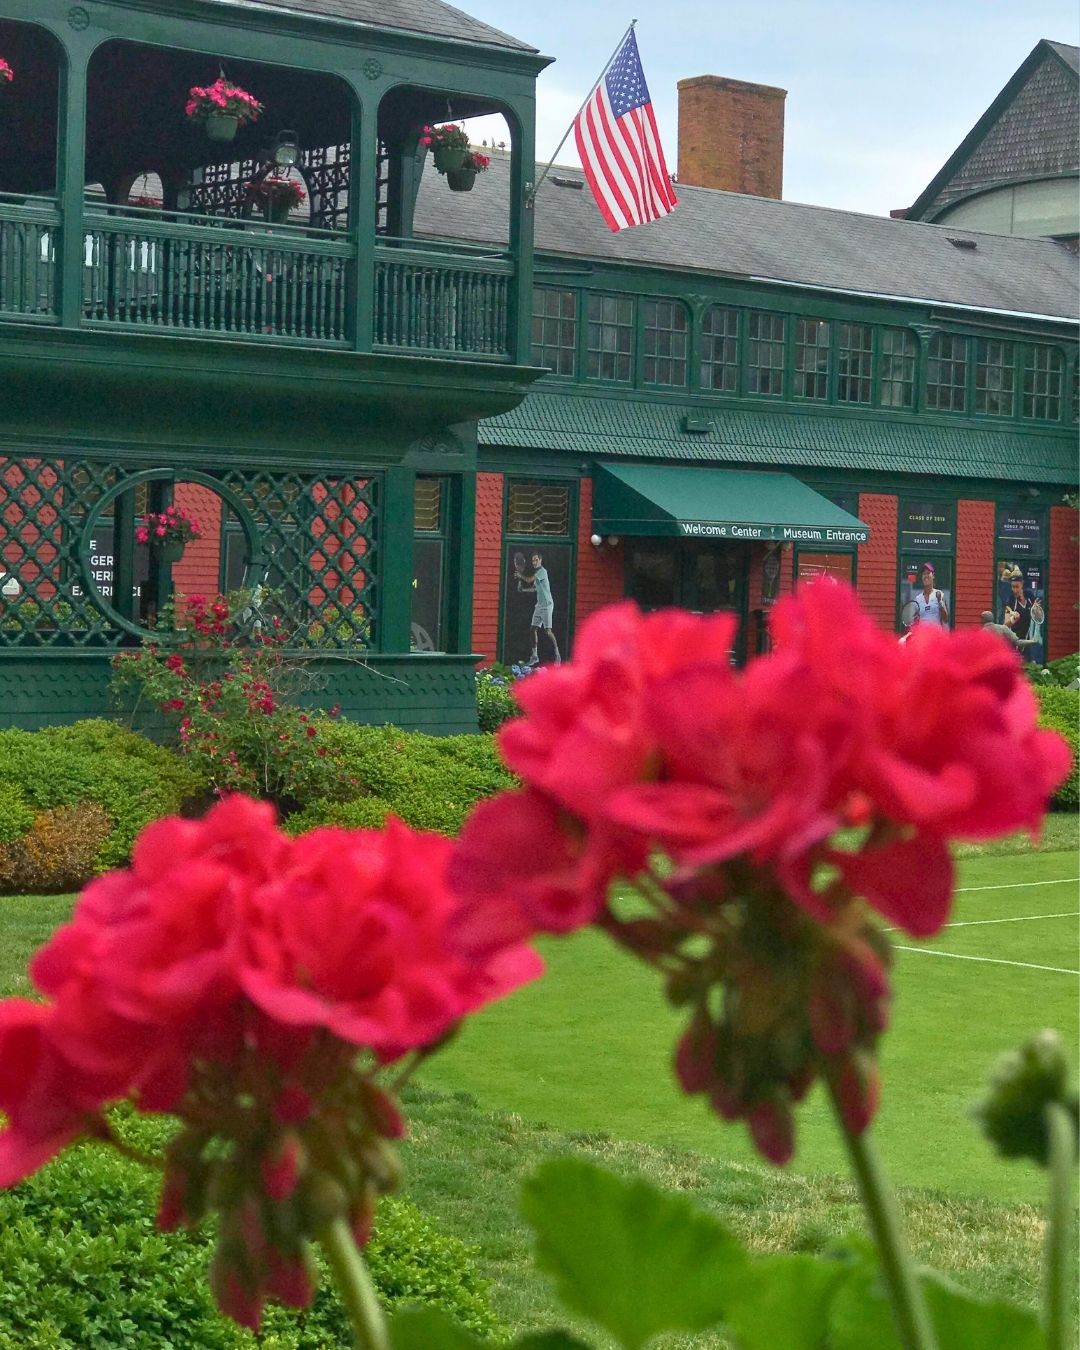 A Day at the Tennis Hall of Fame in Newport, RI